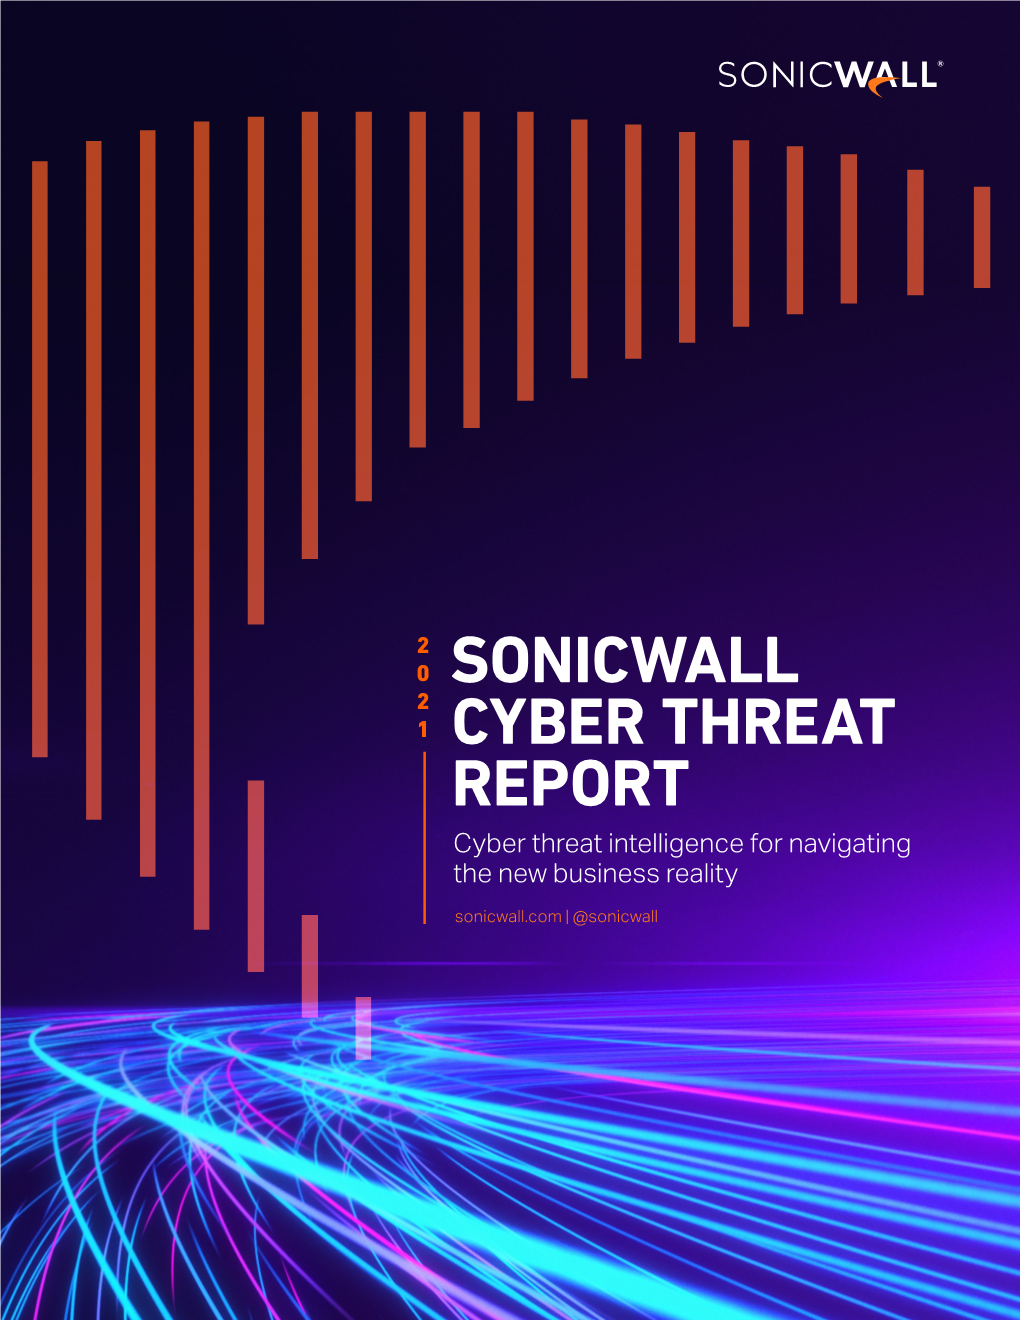 Sonicwall Cyber Threat Report a Note from Bill